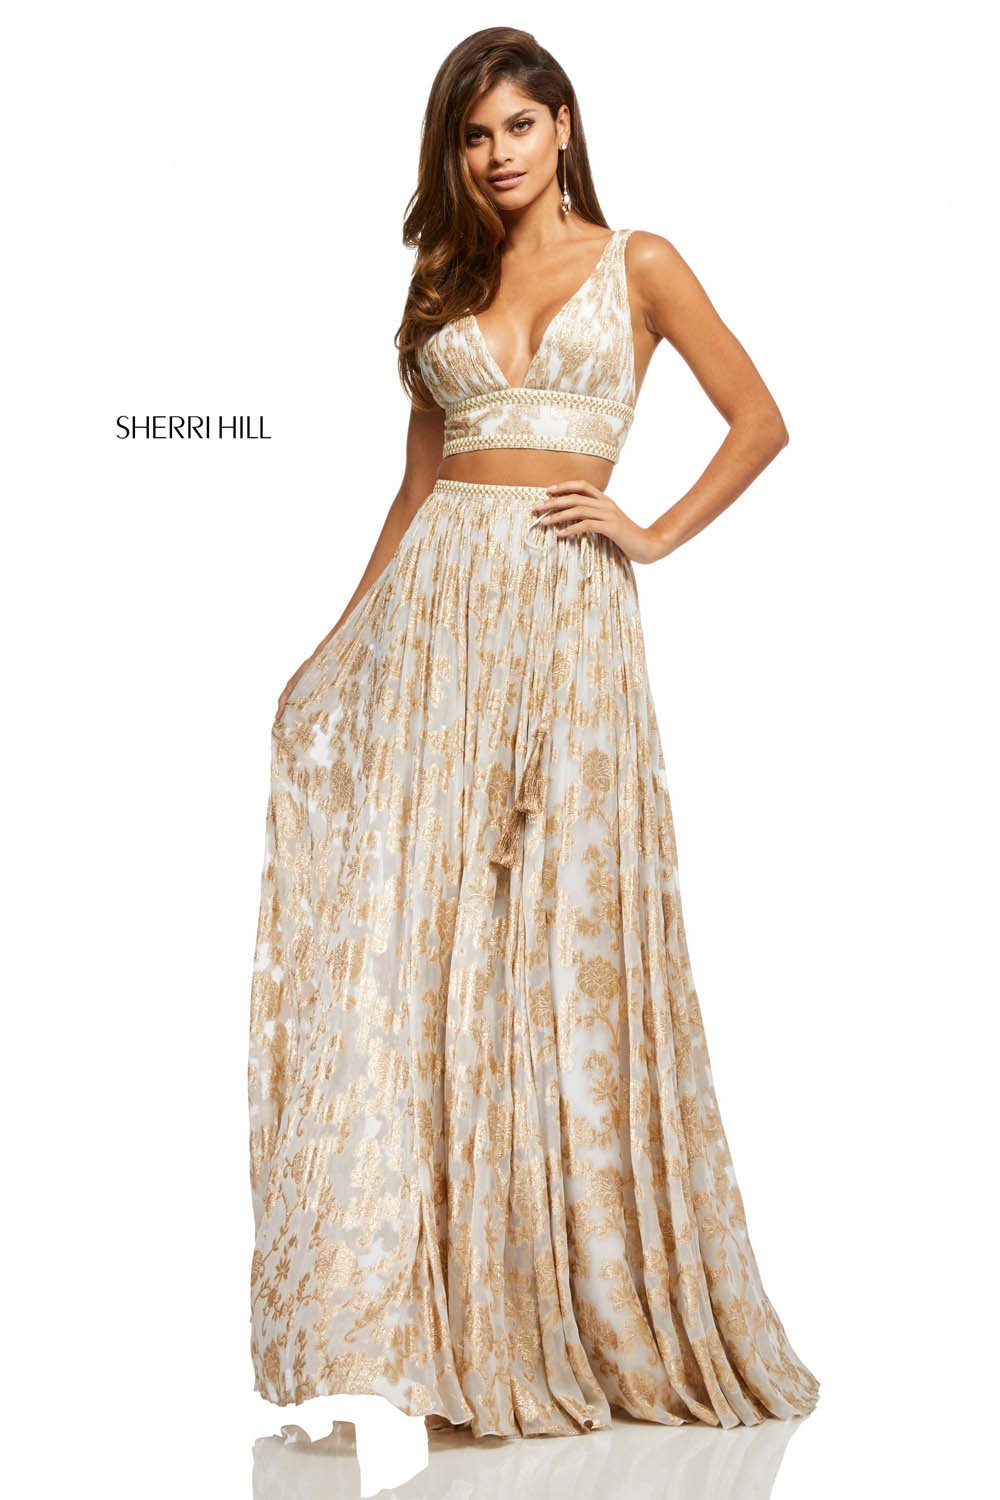 Sherri Hill 52664 dress images in these colors: Ivory Gold.